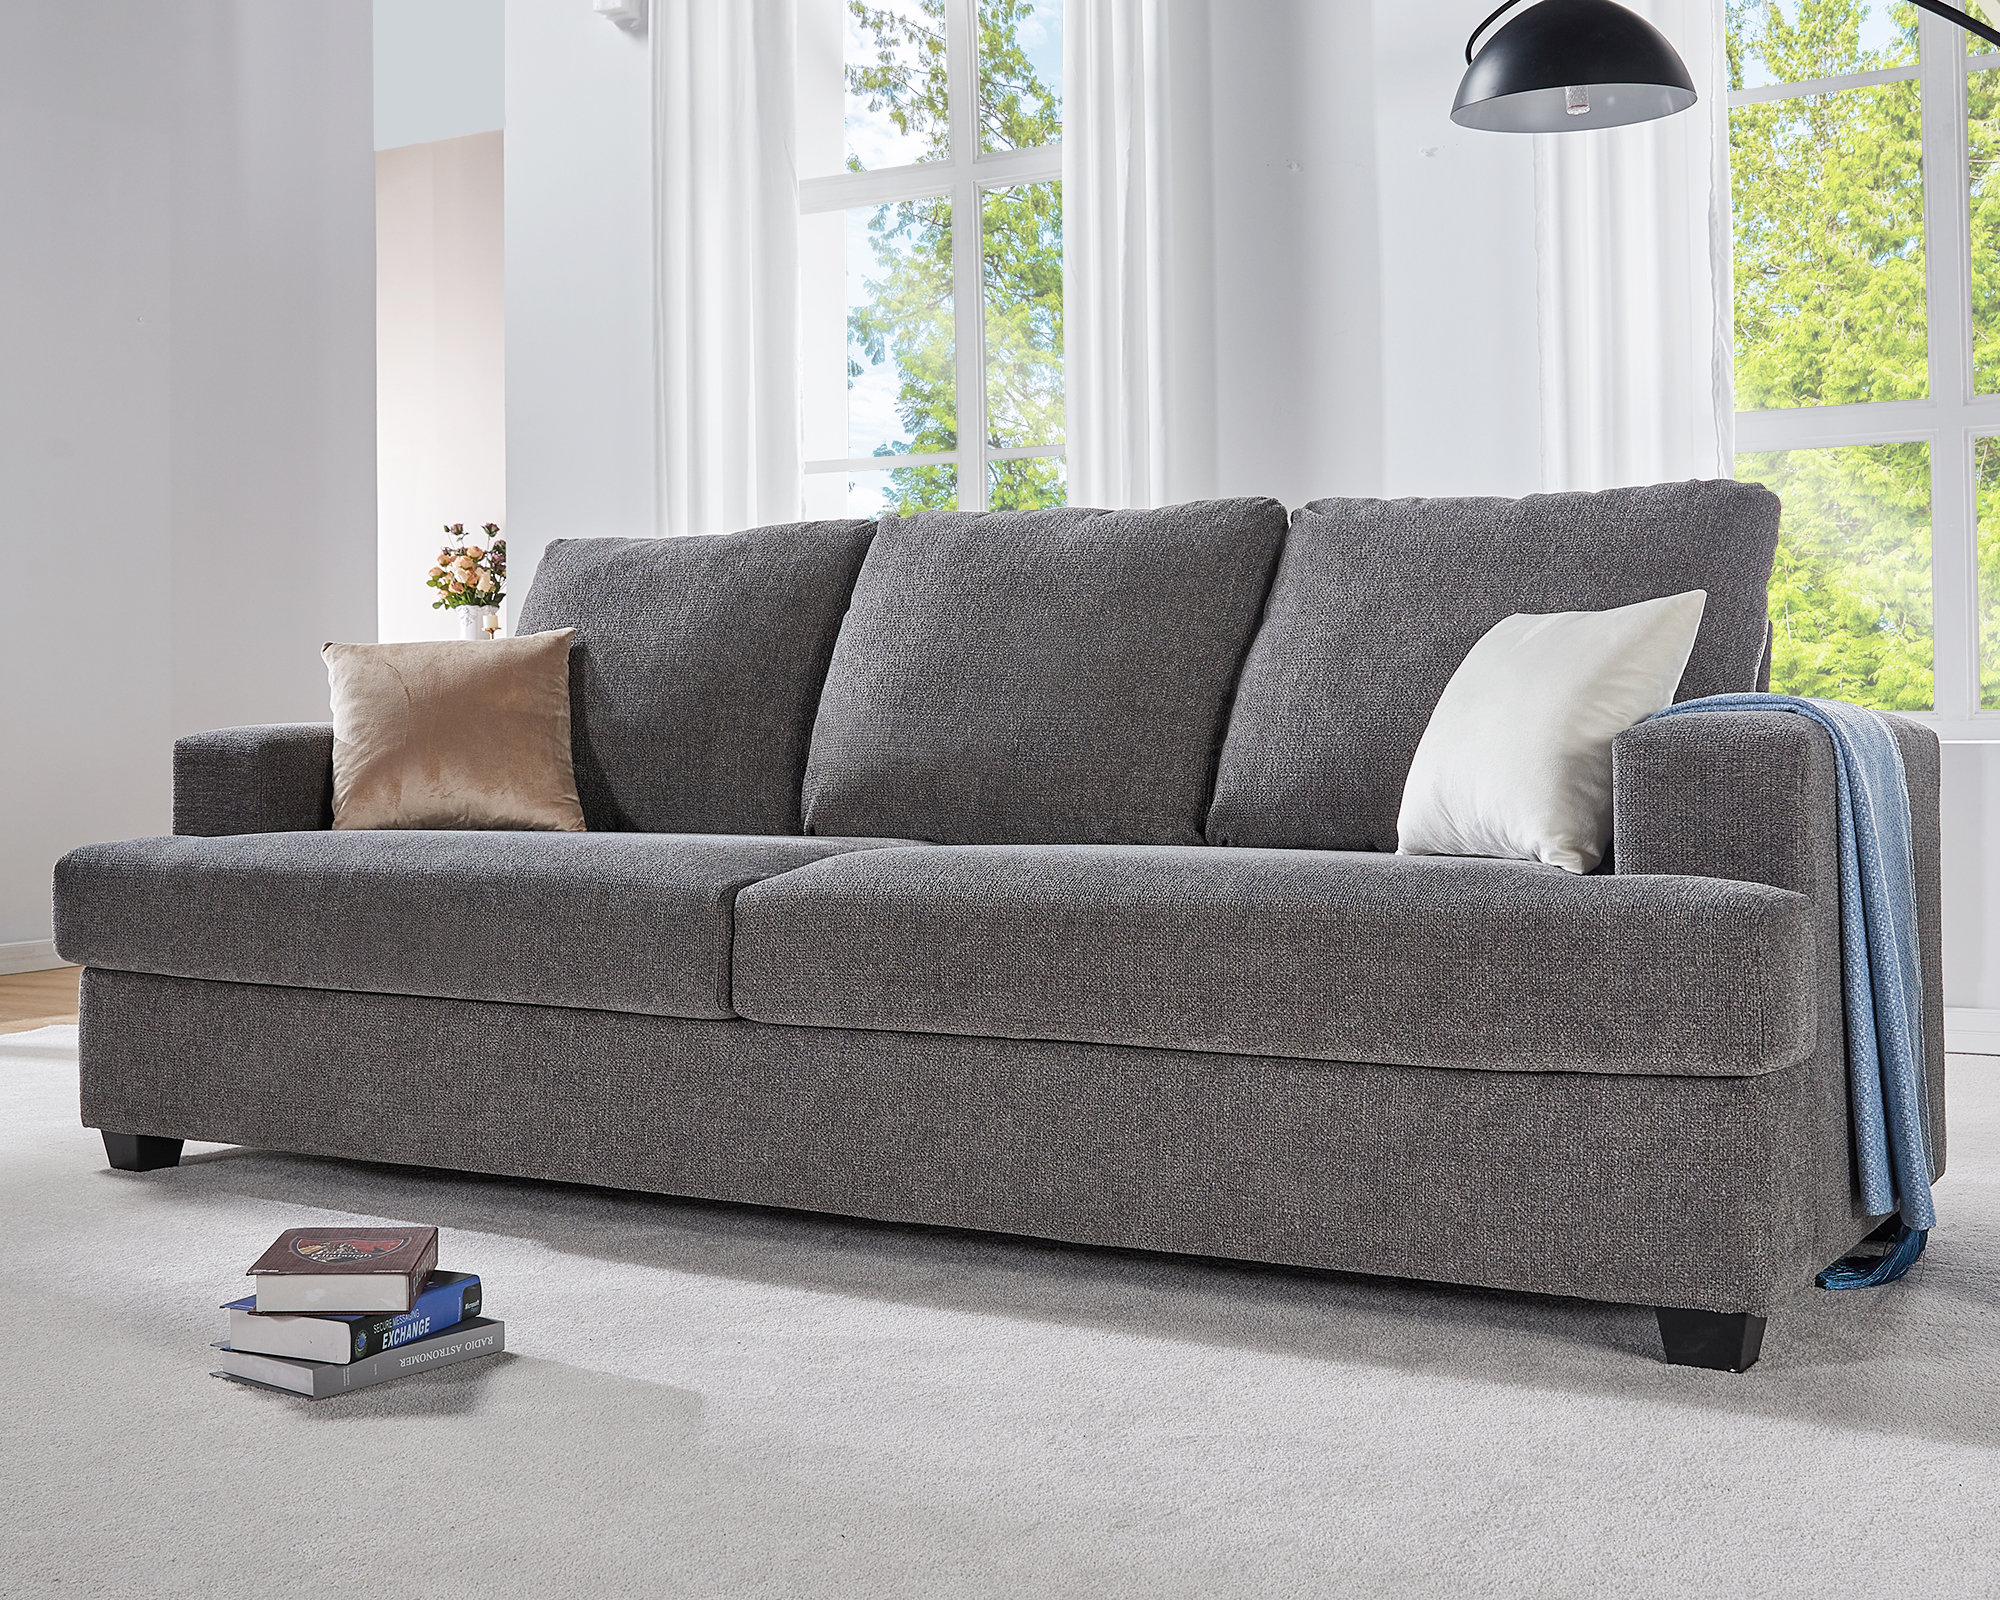 Amerlife Sofa, Deep Seat Sofa-Contemporary Sofa Couch, 97 Wide 3 Seater Sofa Amerlife Fabric: Gray